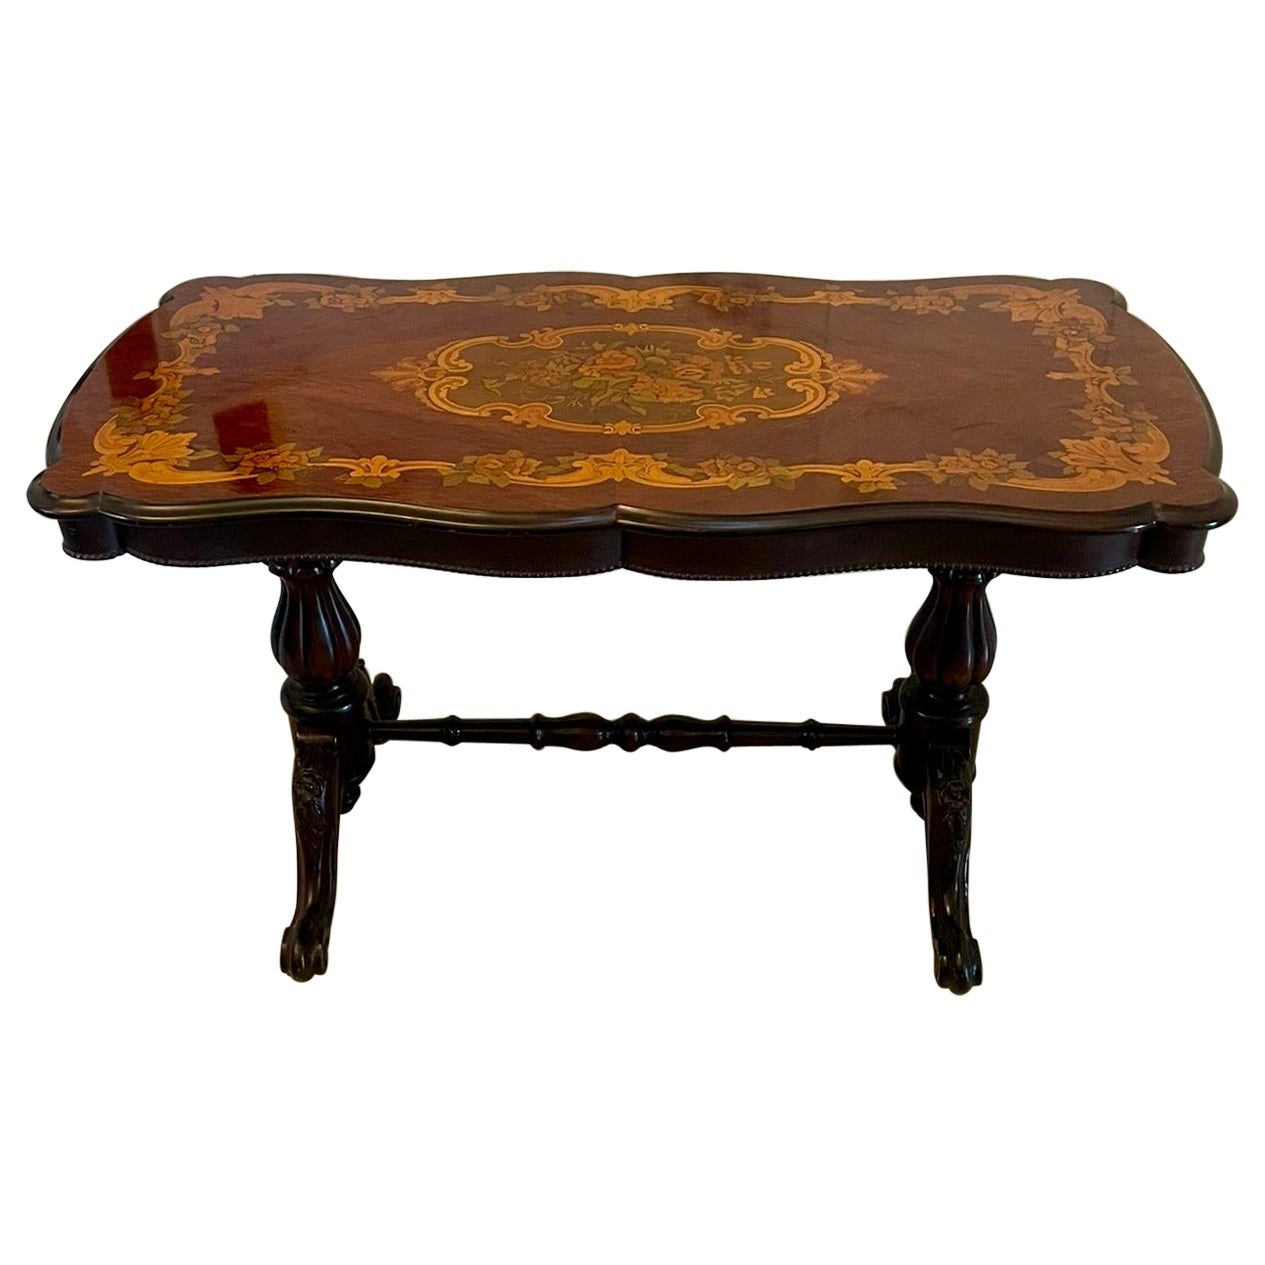 Antique Quality Marquetry Inlaid Figured Walnut Freestanding Centre Table